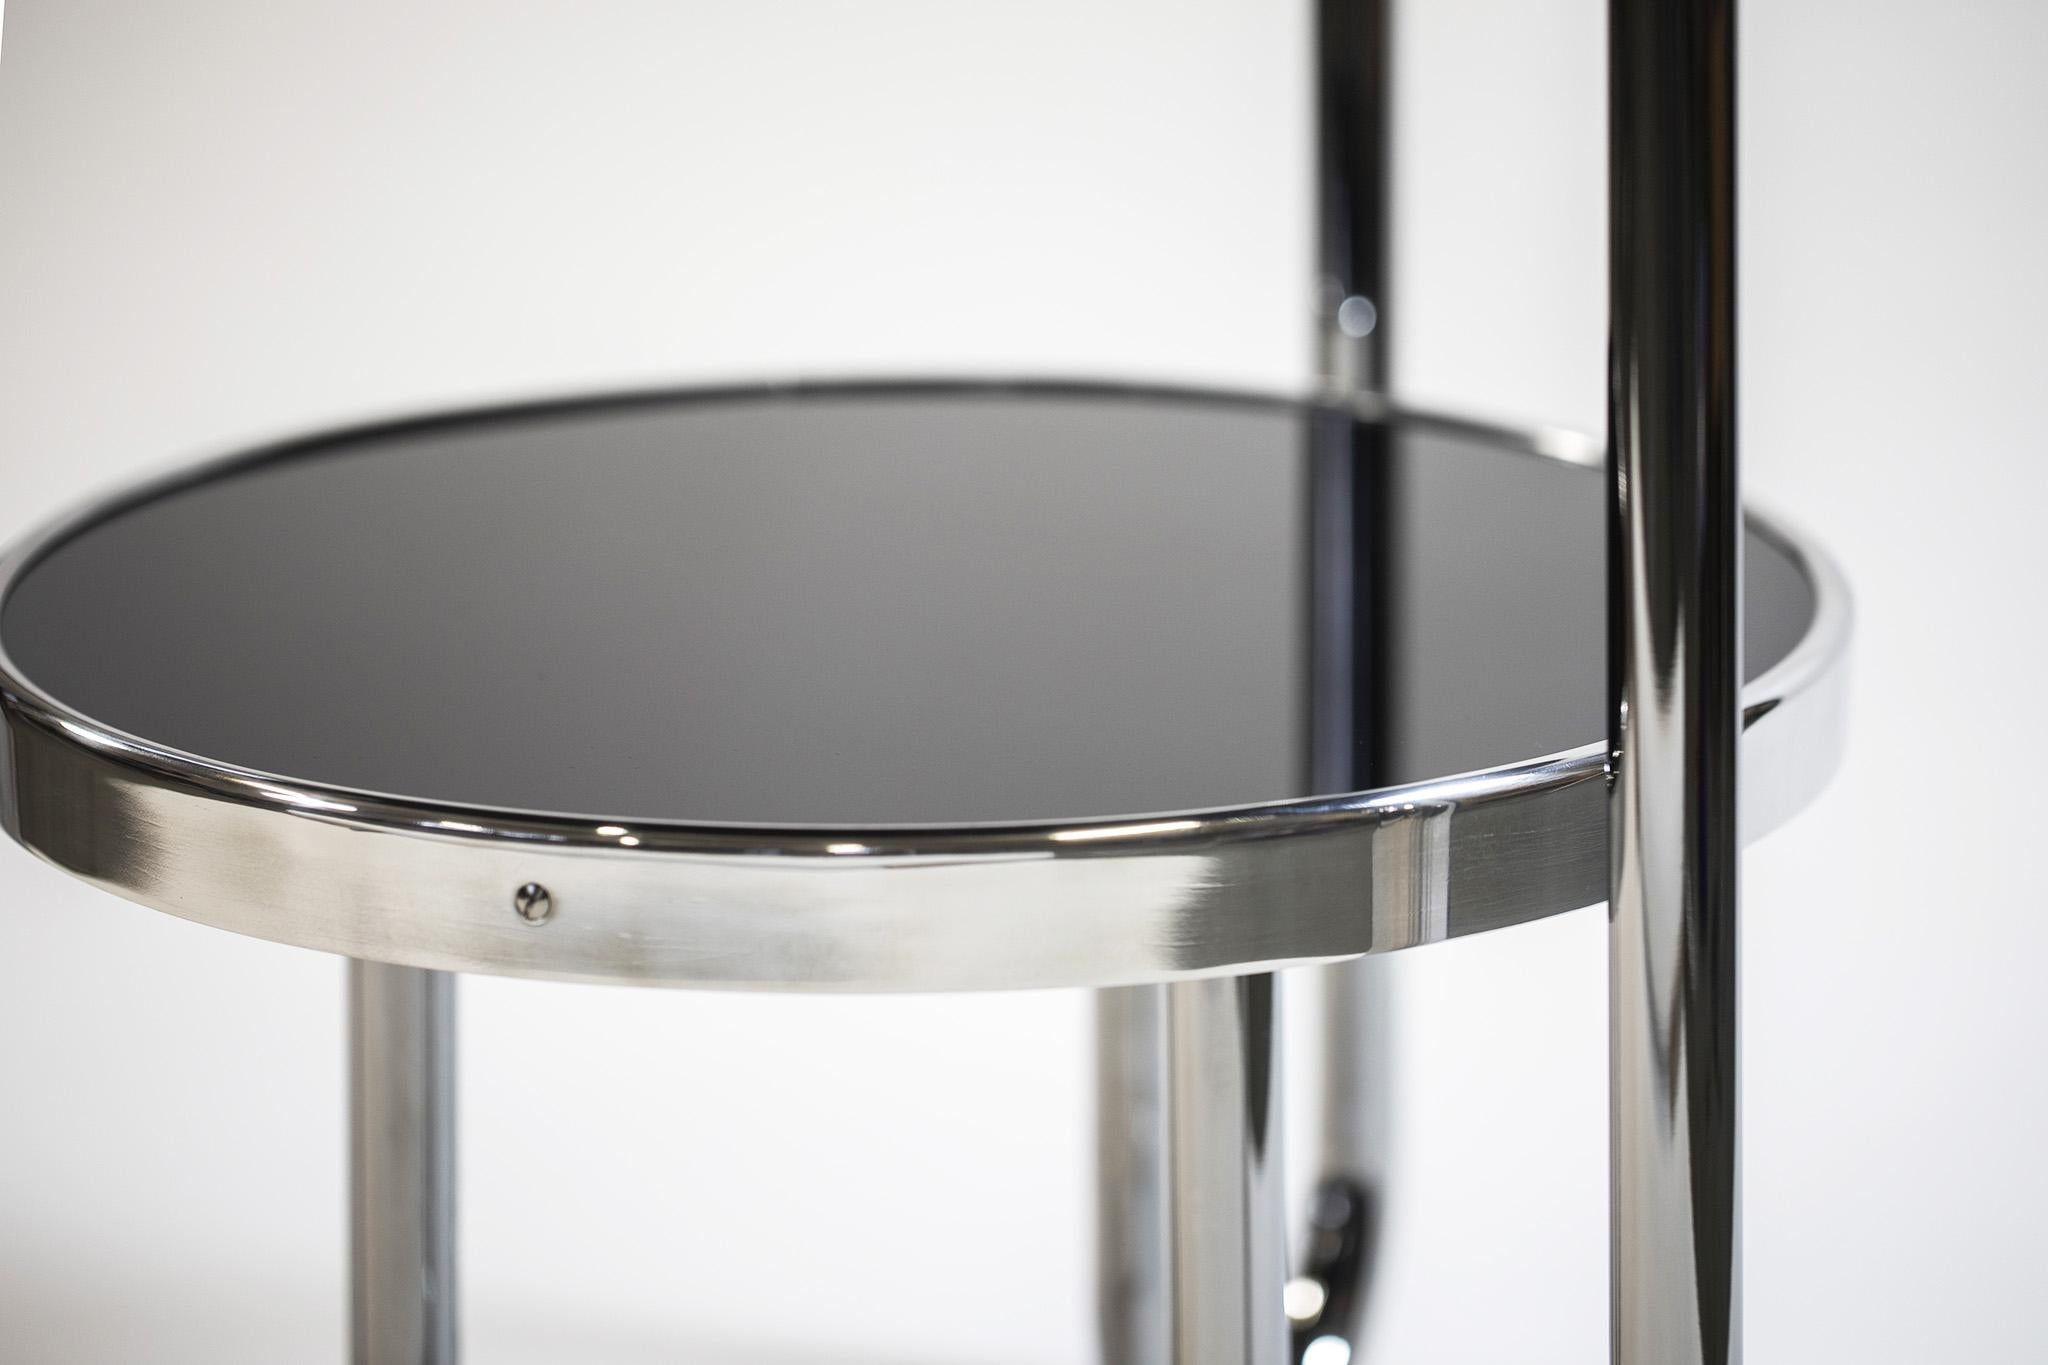 Small Chrome Black Bauhaus Table, Made in 1970s in Czechia, Kovona, Restored In Good Condition For Sale In Horomerice, CZ